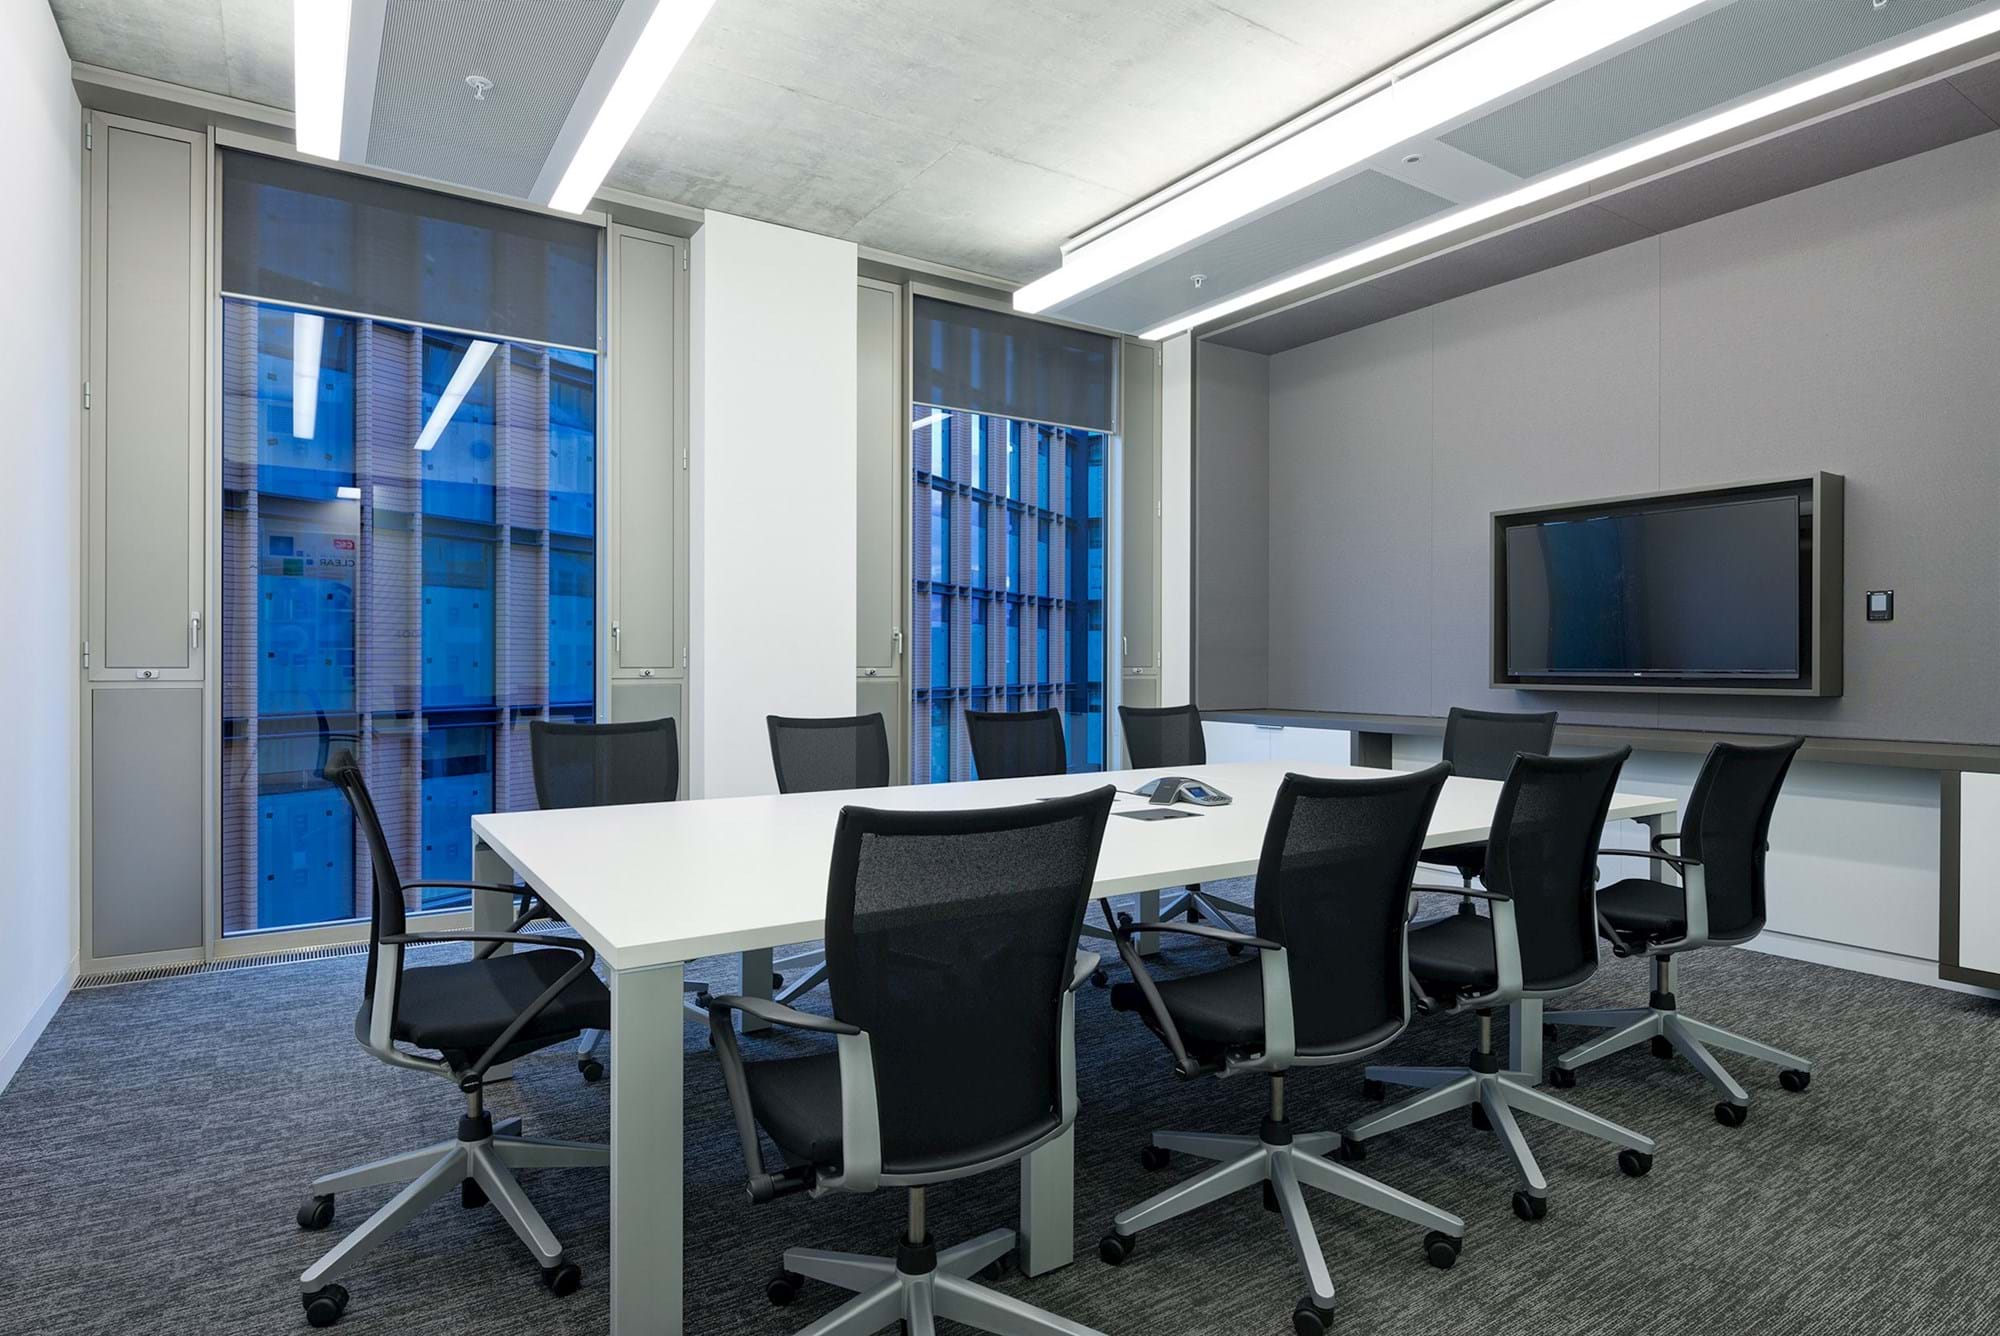 Modus Workspace office design, fit out and refurbishment - IT Company - Meeting Room - CSG London 11 highres sRGB.jpg